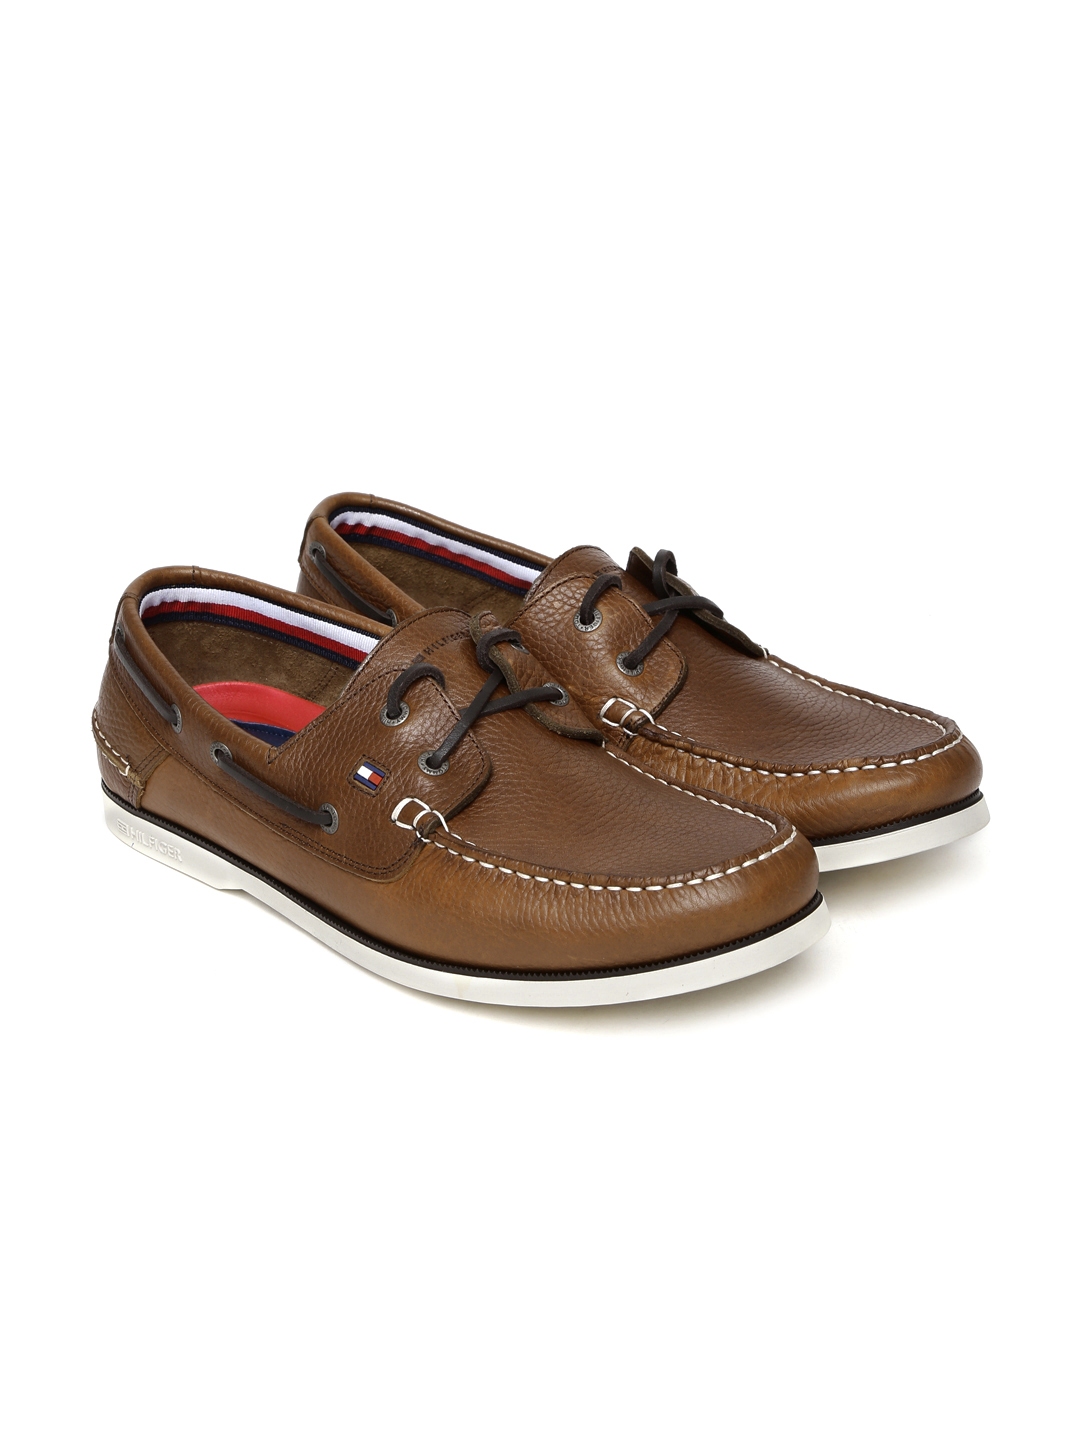 Tommy Hilfiger leather boat shoe in brown